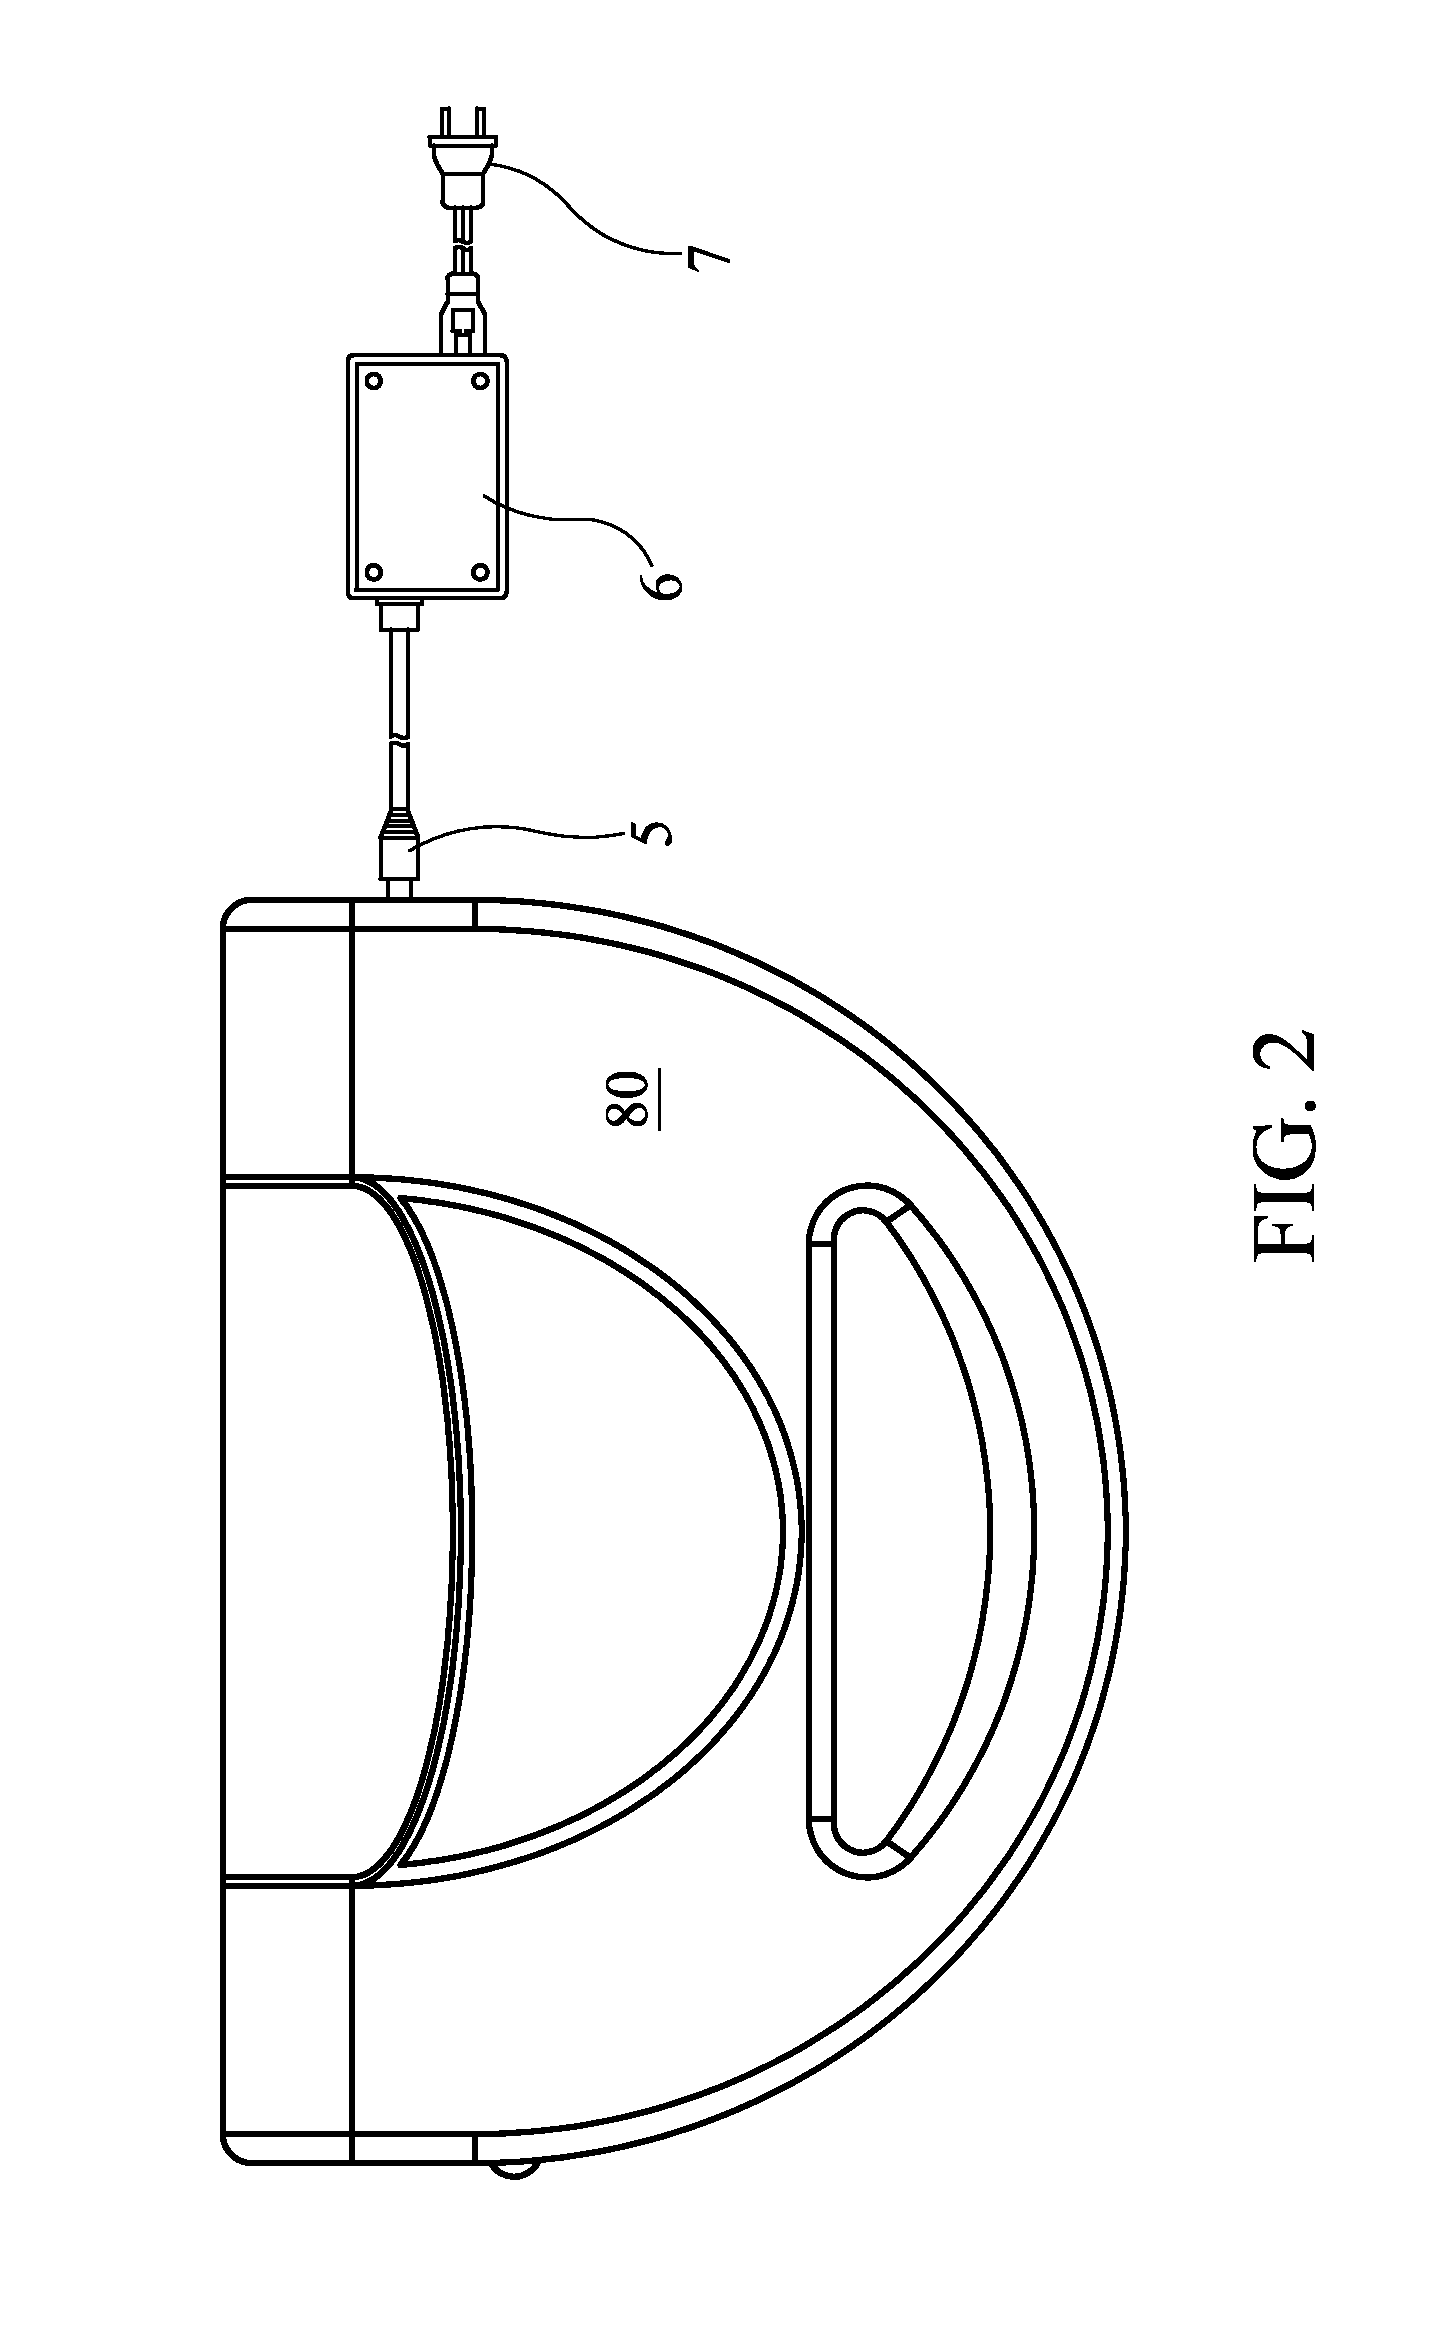 Portable Therapeutic Device Using Rotating Static Magnetic Fields